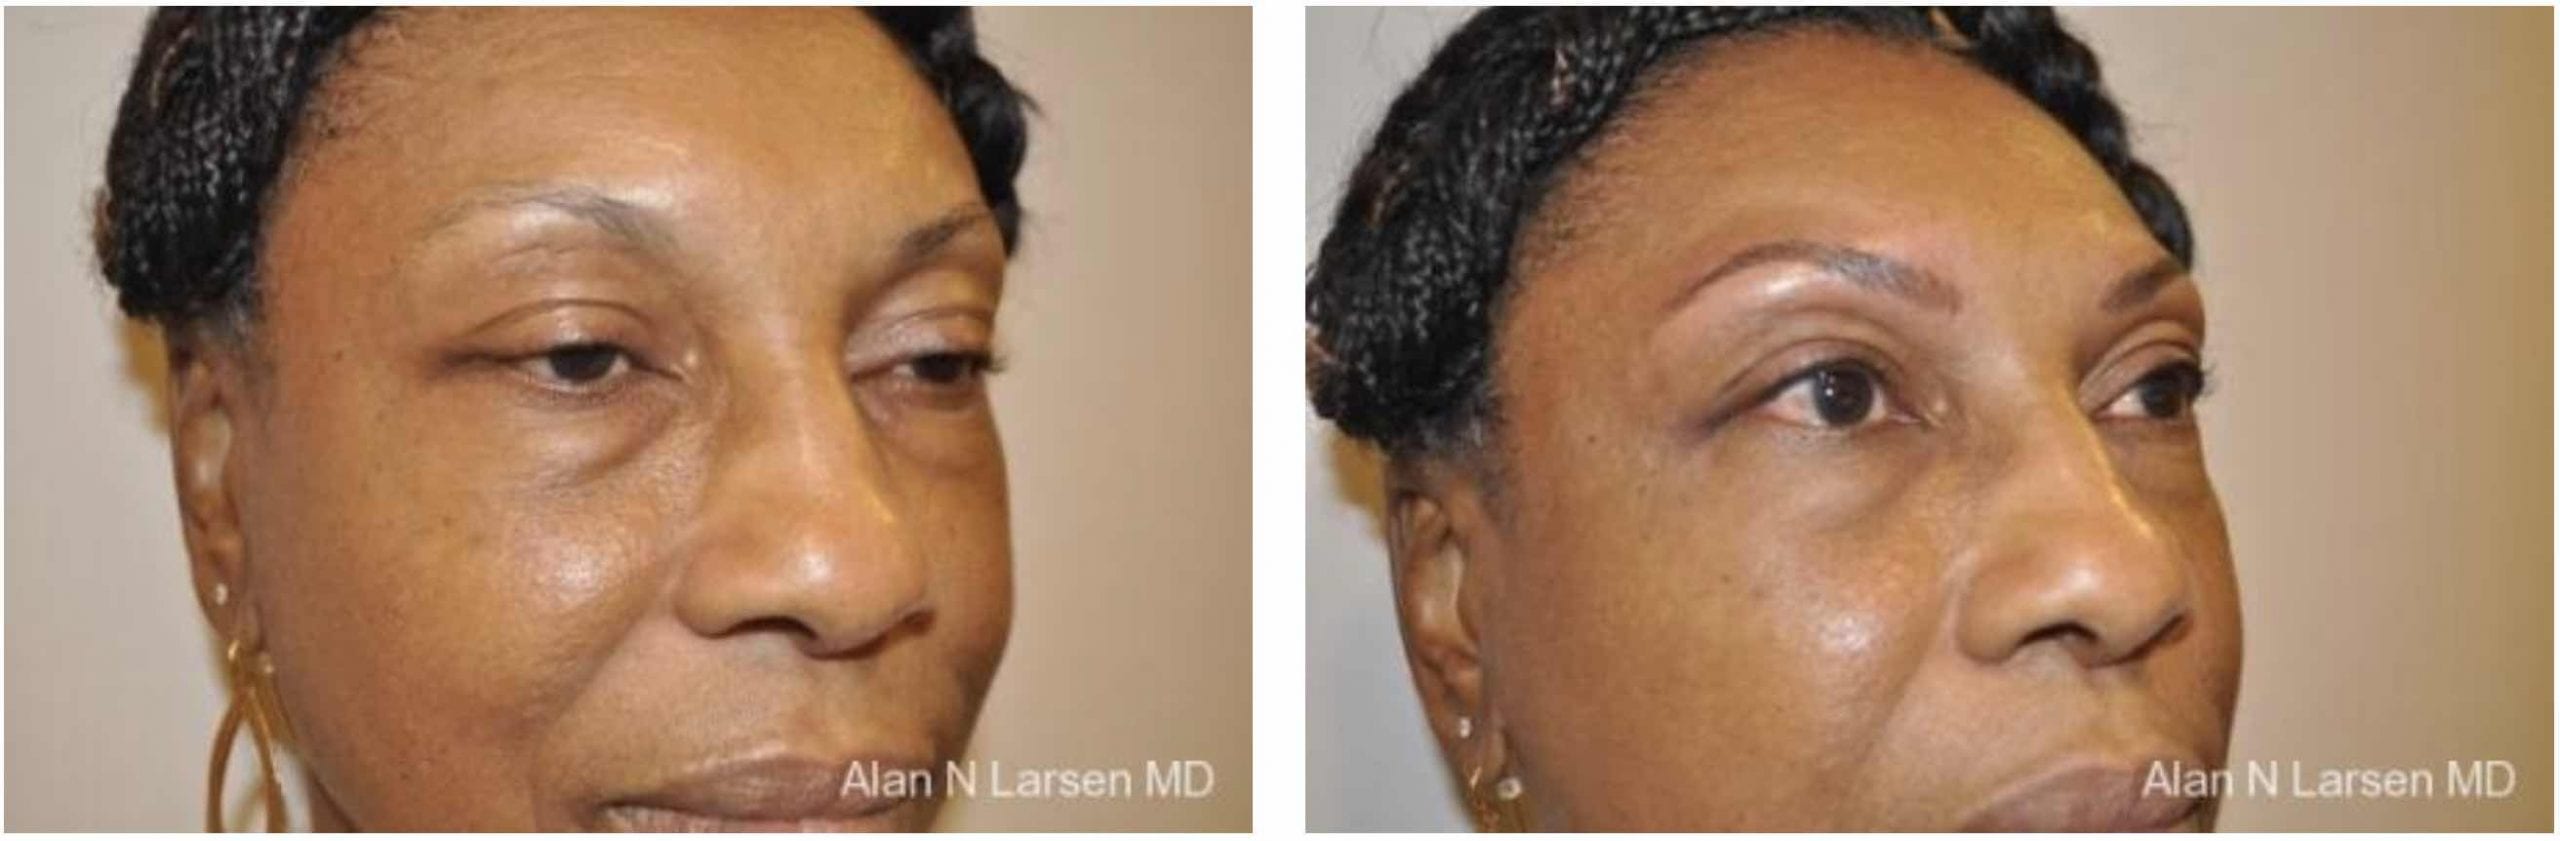 LUX Med Spa at Before and After Photo Gallery | Microblading | Buckhead Plastic Surgery | Alan N. Larsen, MD | Board-Certified Plastic Surgeon | Atlanta GA